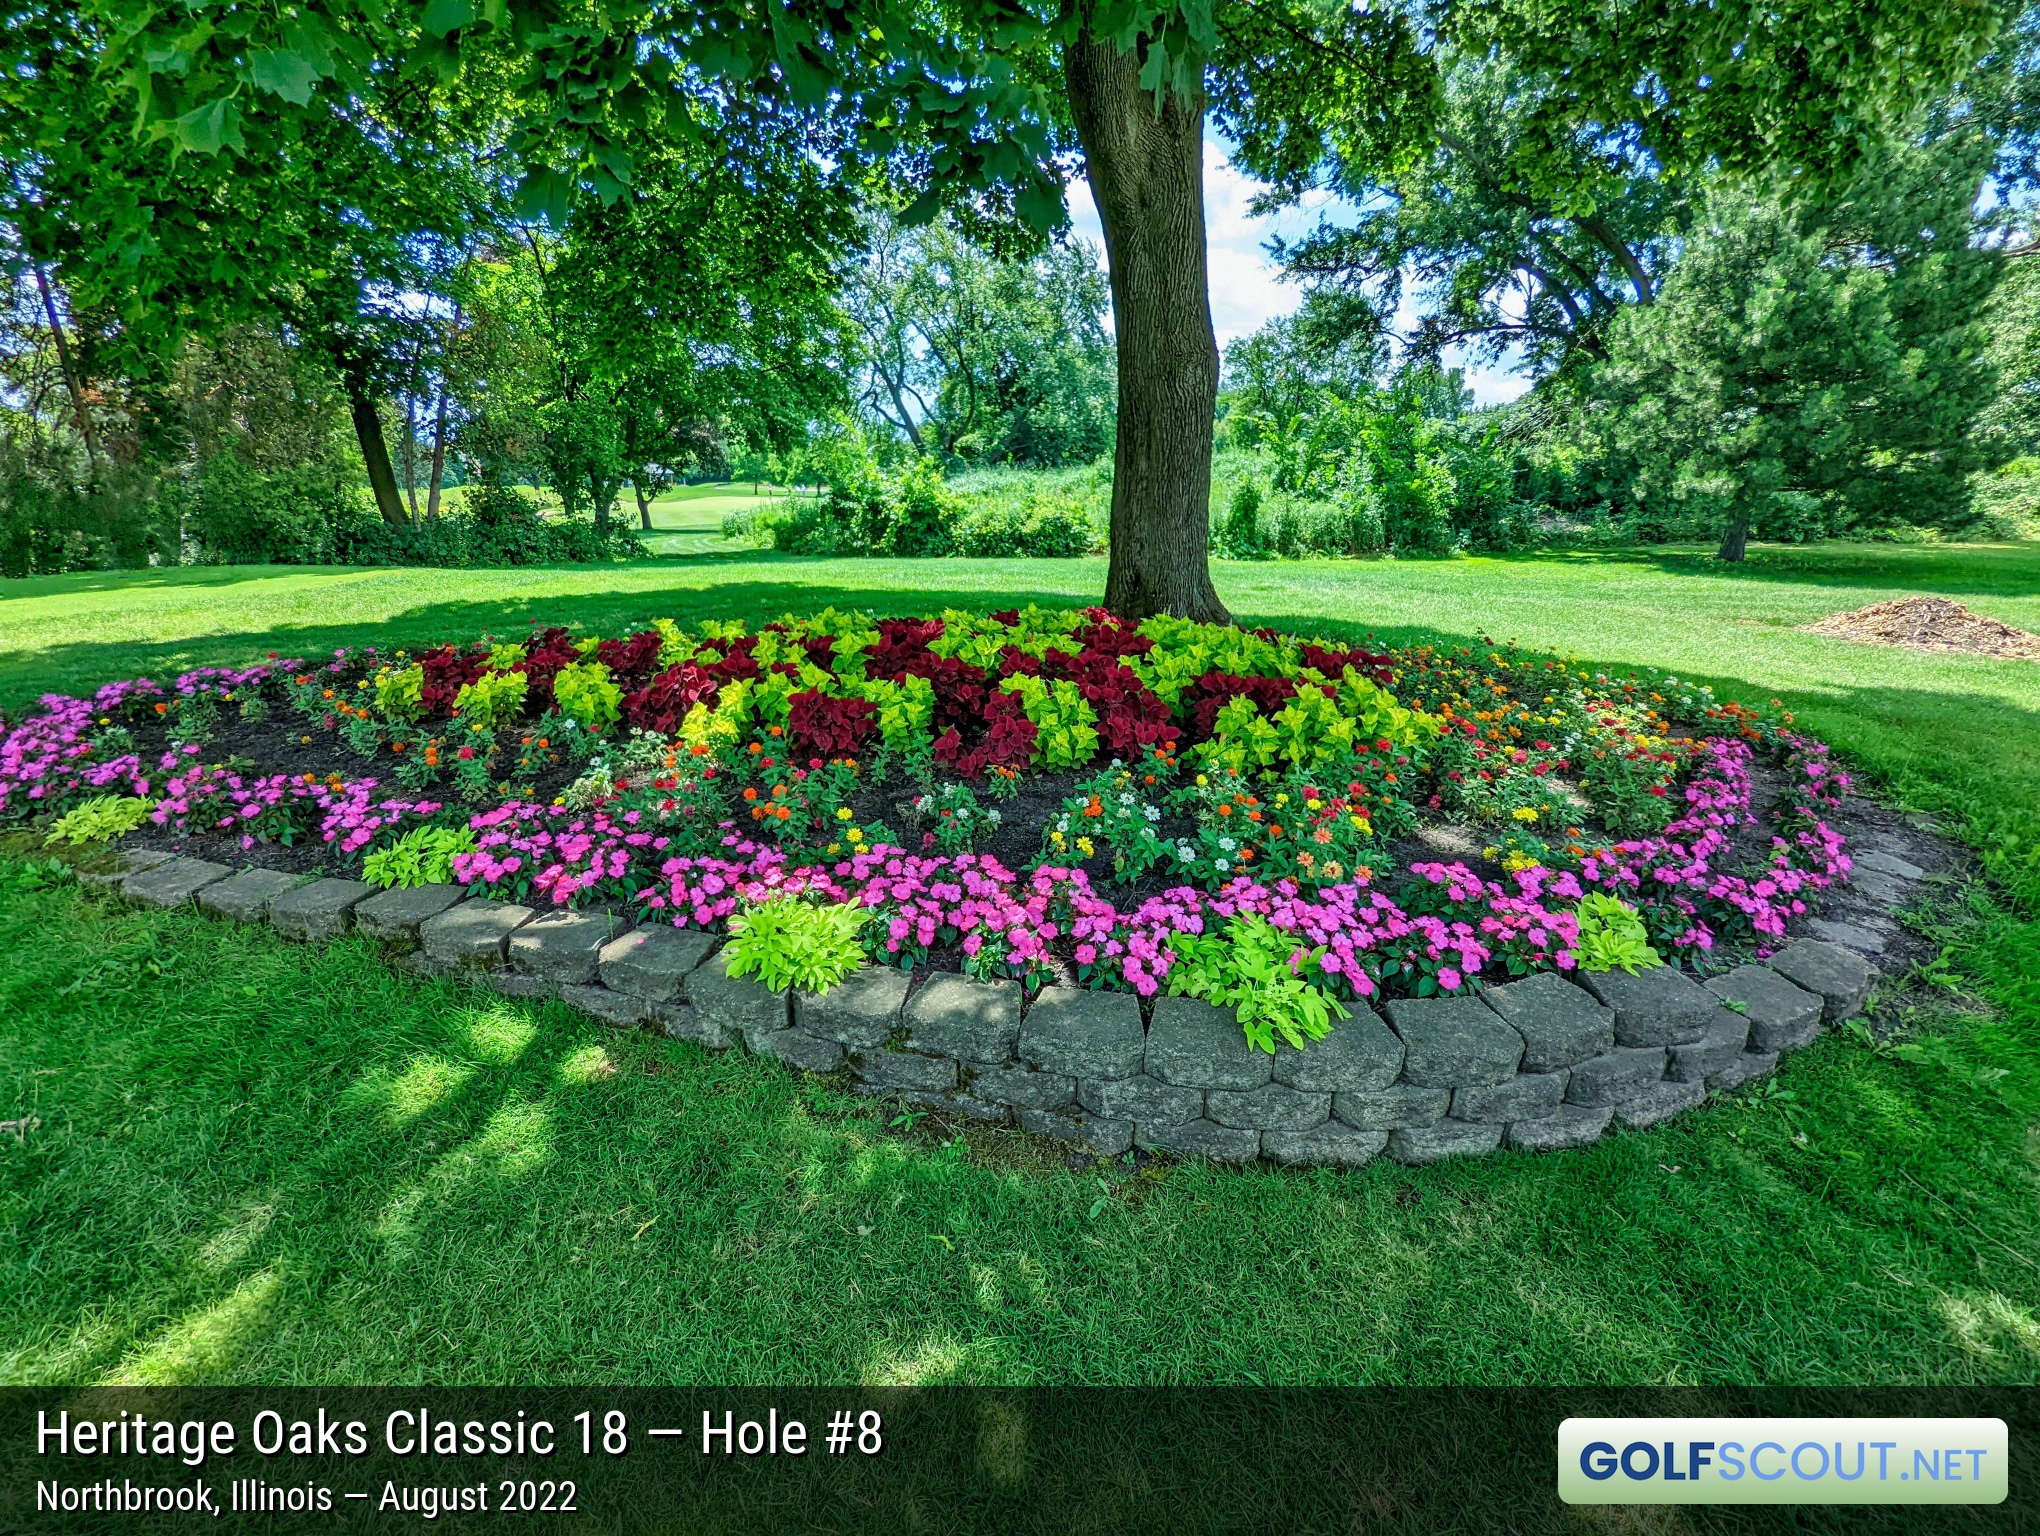 Photo of hole #8 at Heritage Oaks Golf Club - Classic 18 in Northbrook, Illinois. 